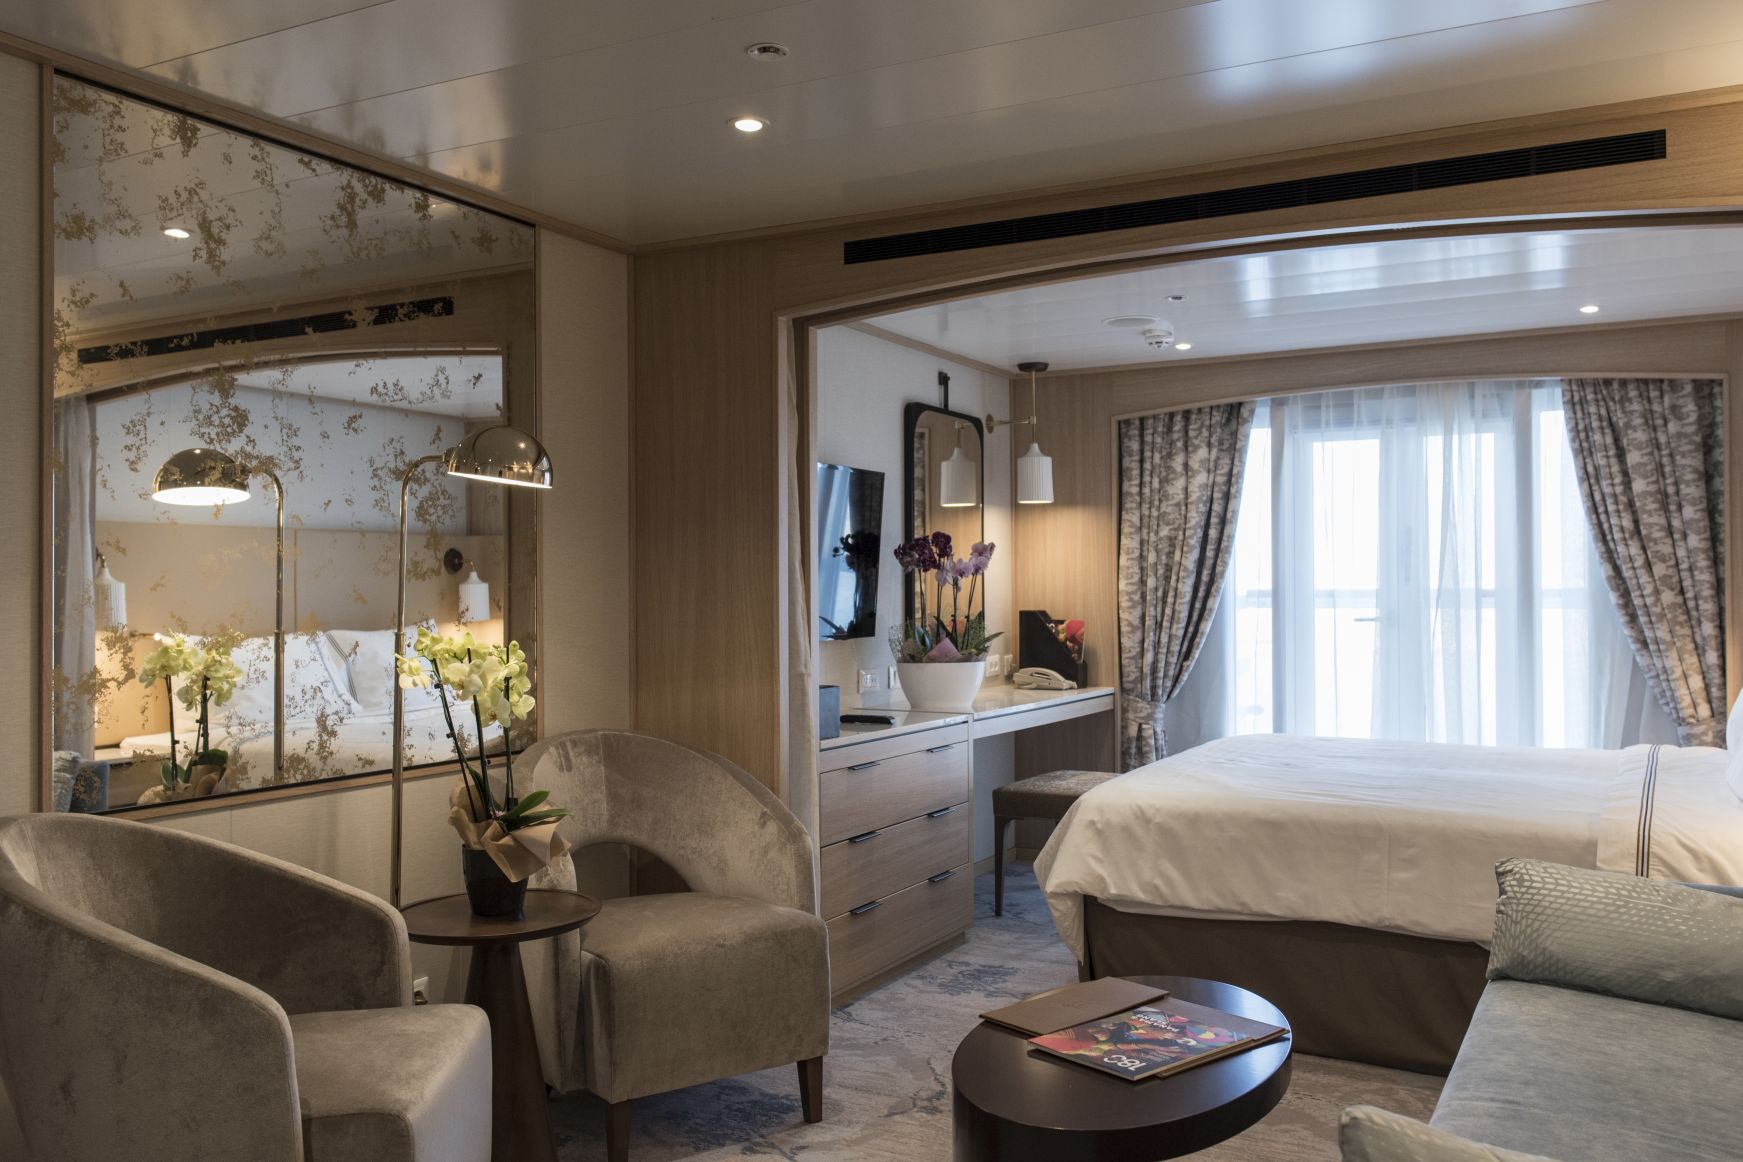 Seattle-based Windstar Cruises has unveiled its revitalised Star Breeze vessel, with 50 new suites, two innovative new restaurants, and a reimagined spa and fitness centre. 